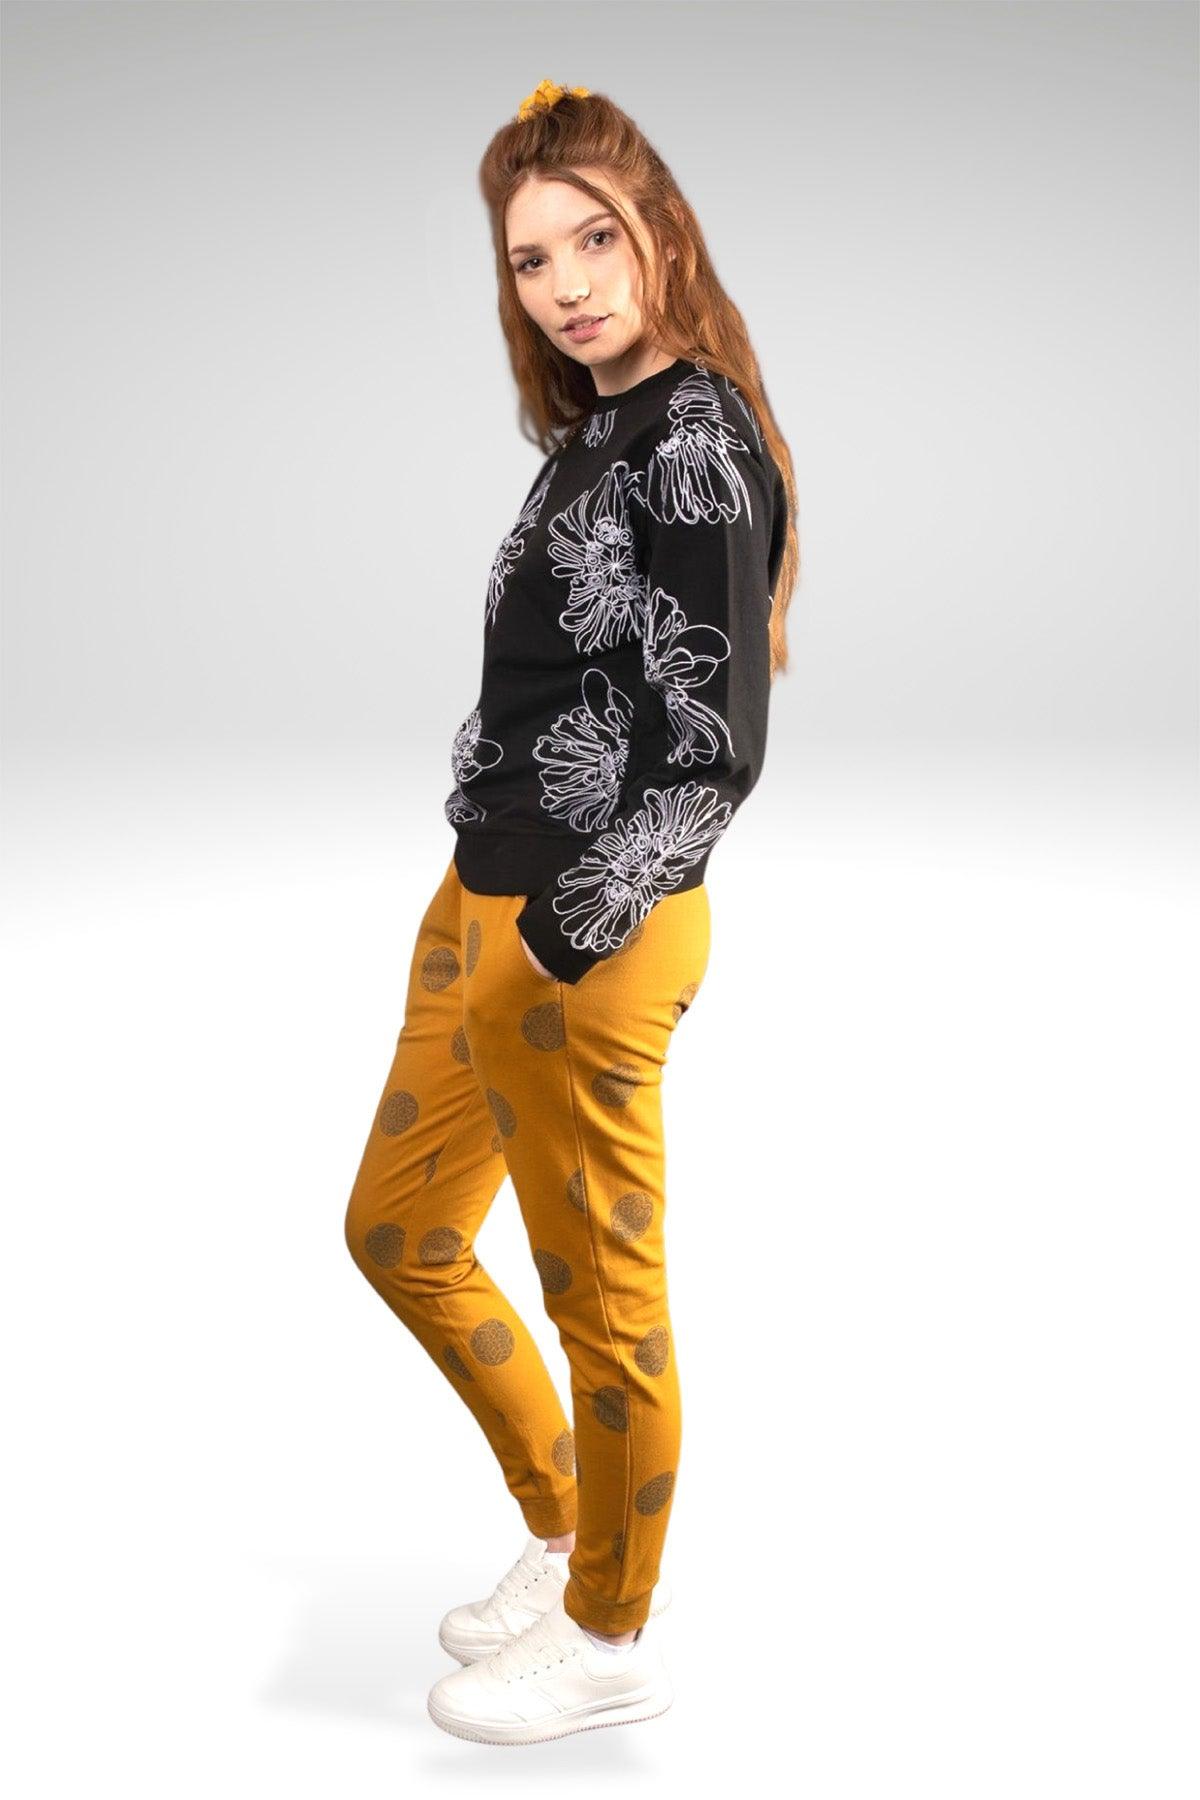 LETICIA EMBROIDERED KNIT SWEATSHIRT - zohaonline